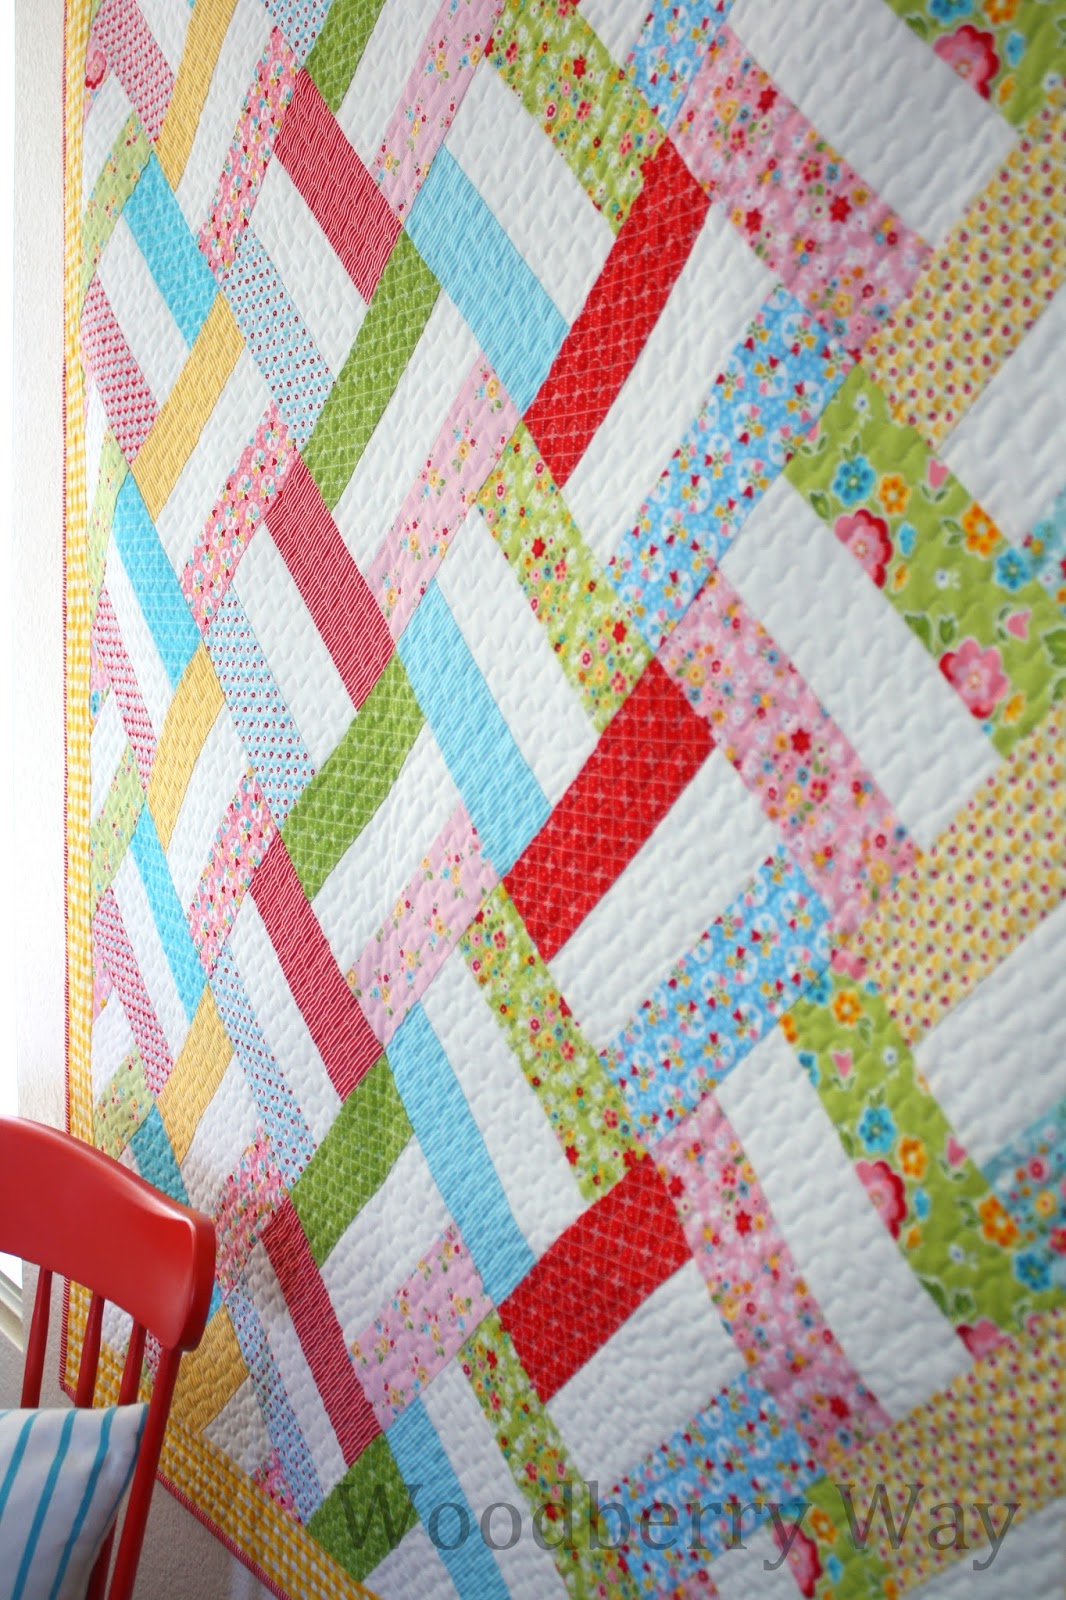 woodberry-way-easy-strip-quilt-pattern-baby-basket